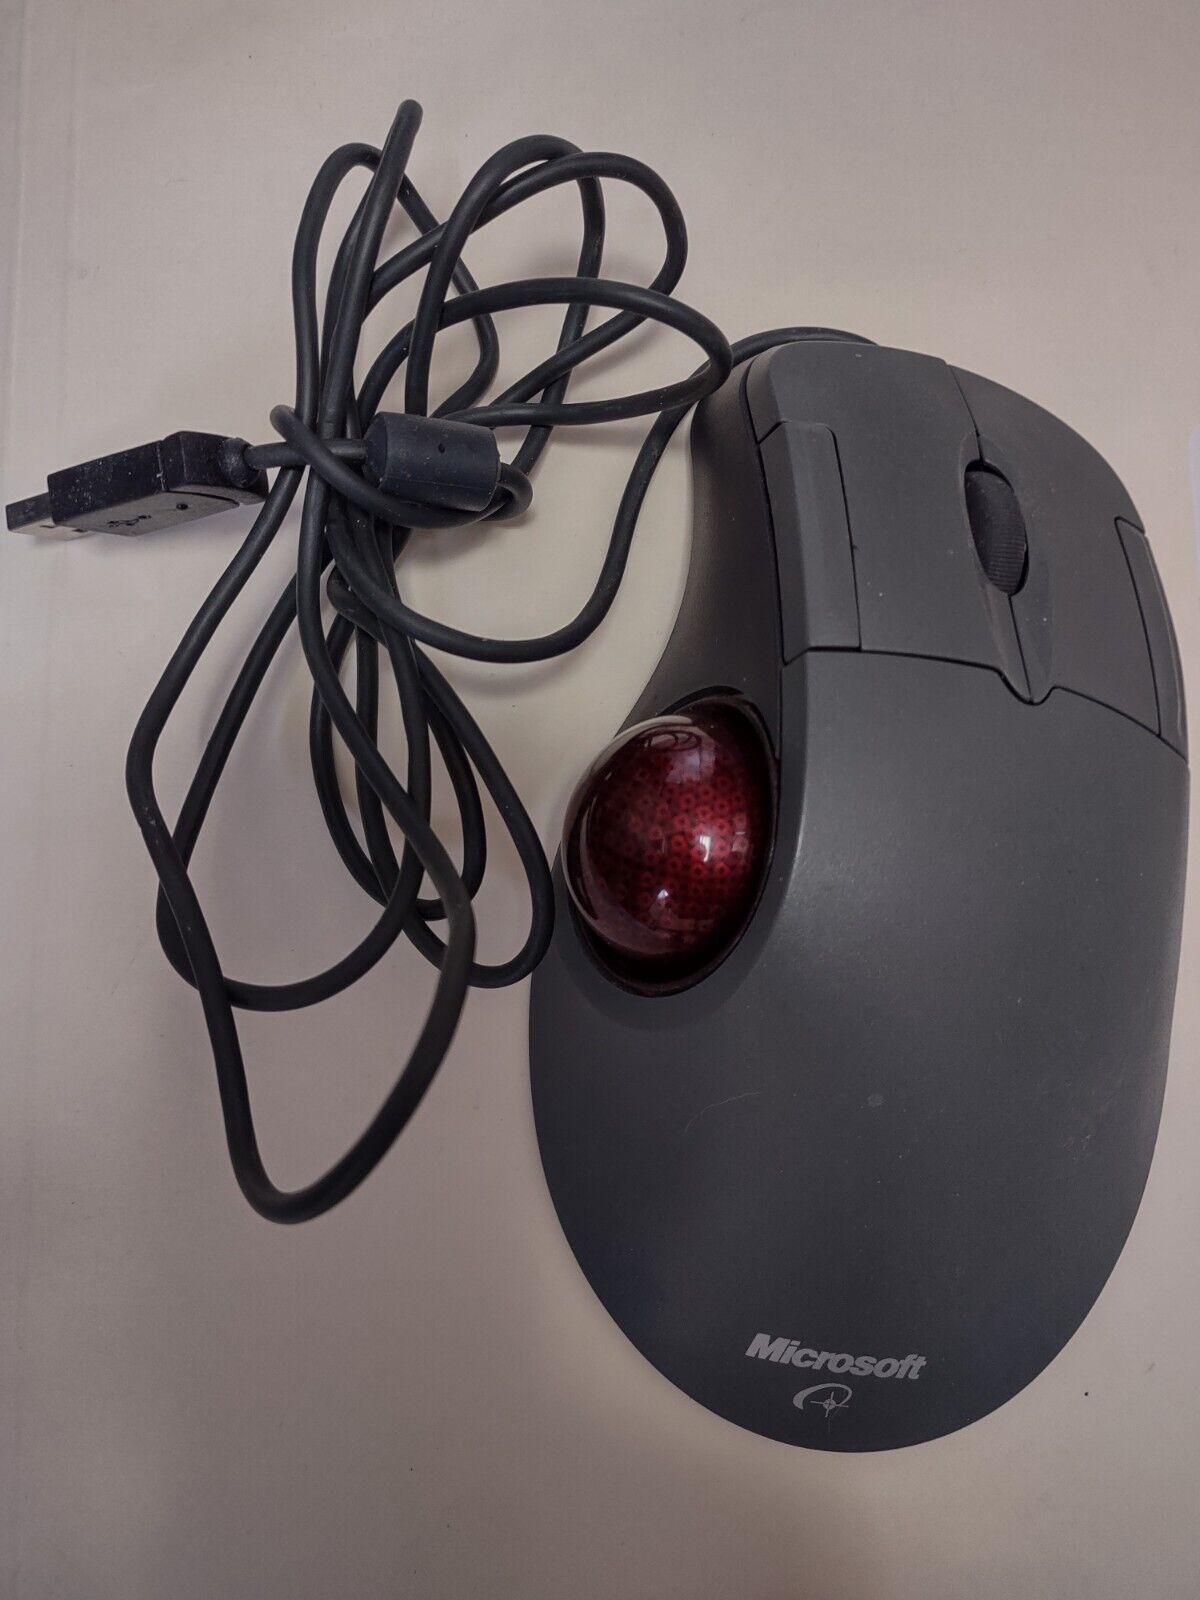 Microsoft Trackball Optical 1.0 Mouse USB X08-70386 Fully Functional Tested.